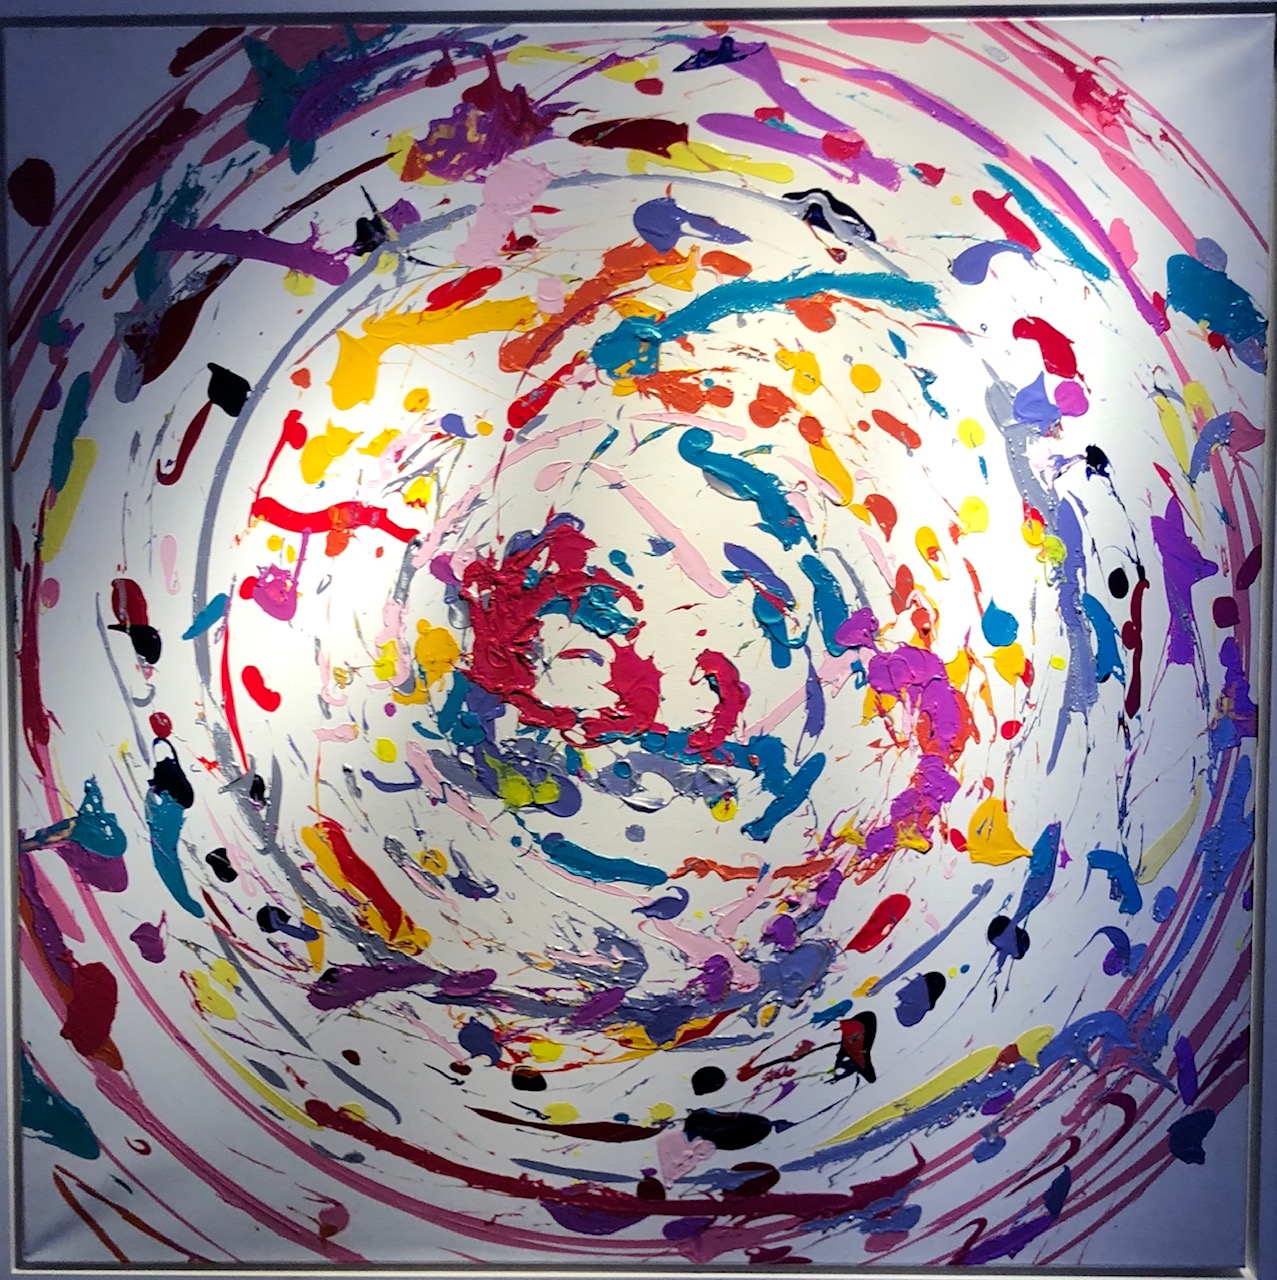 SPIN PAINTING